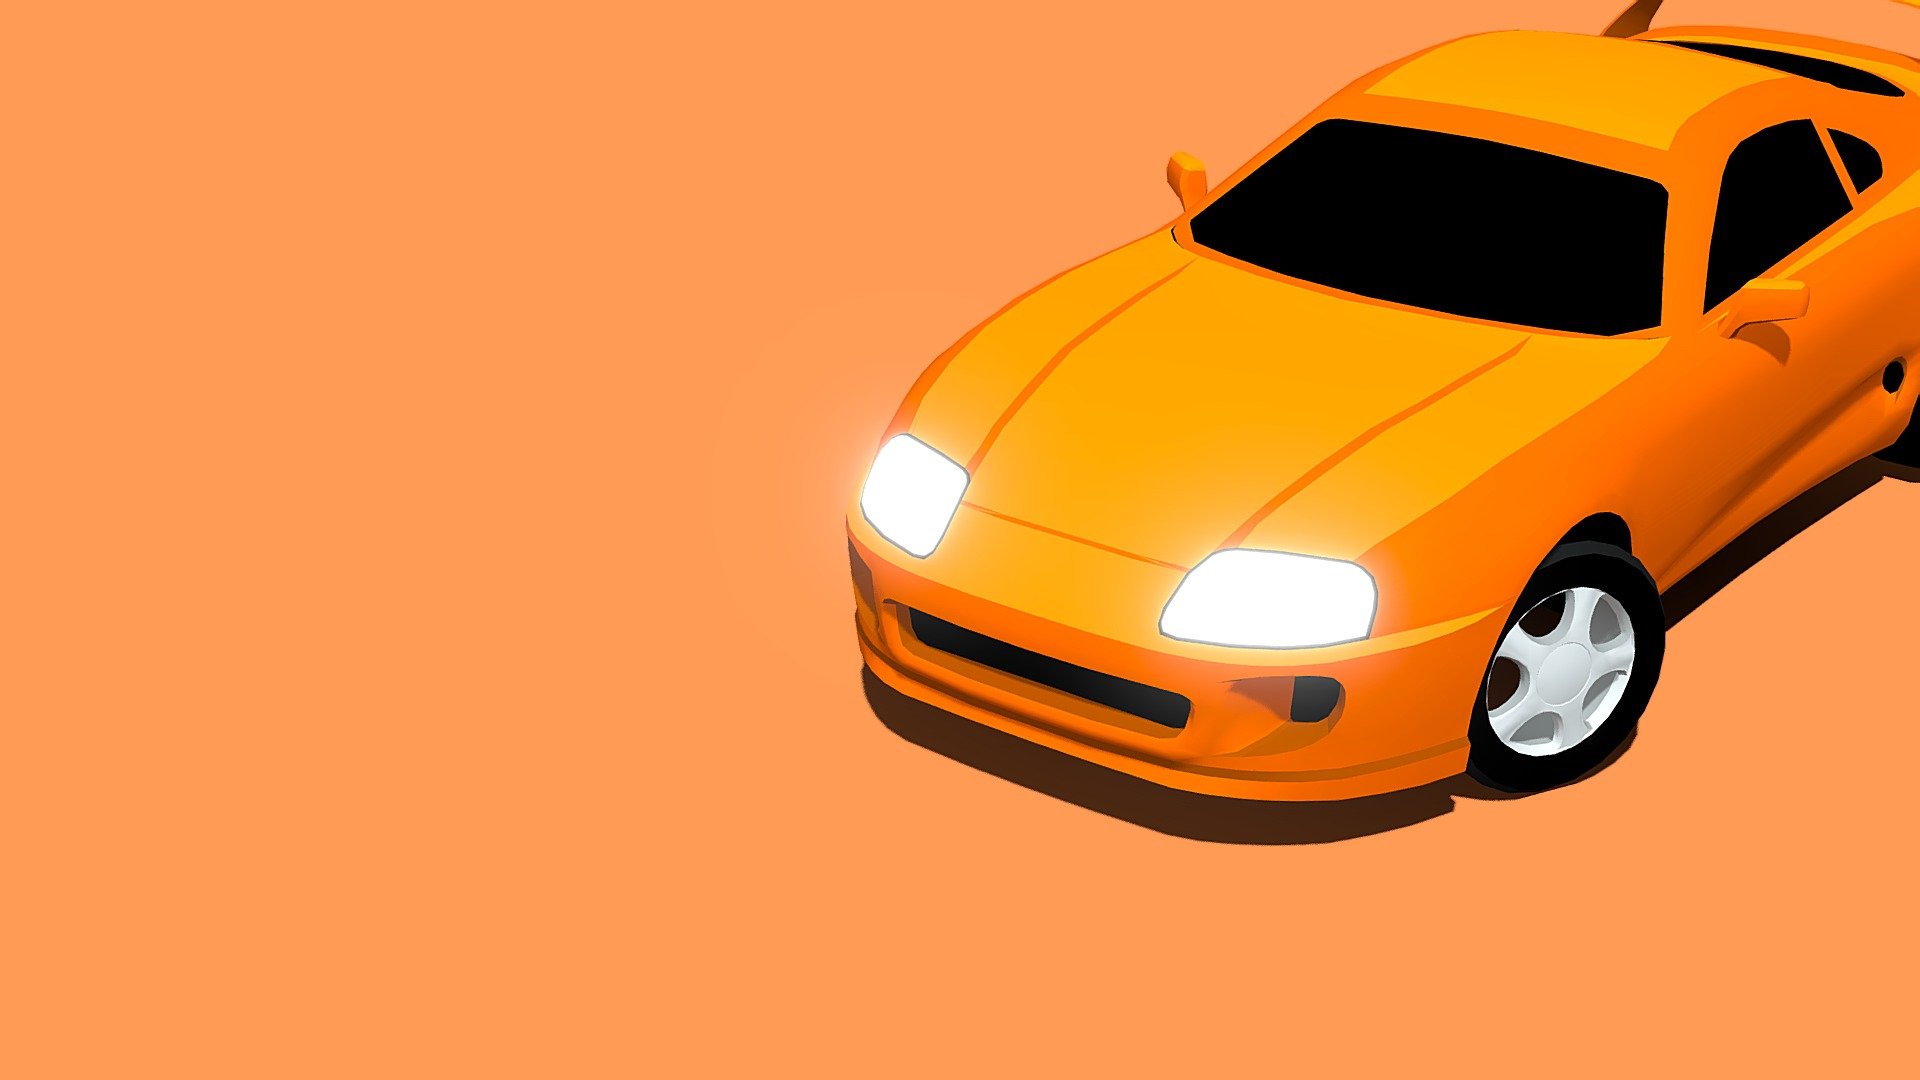 This is “Supreme”, a stylized car that is included in my 3D asset called STYLIZED: Drift Cars, which contains 14 unique drifting cars in 6 colors. Available in the Unity Asset Store and Sketchfab.

If you have any question, please write it in the comment section below 3d model